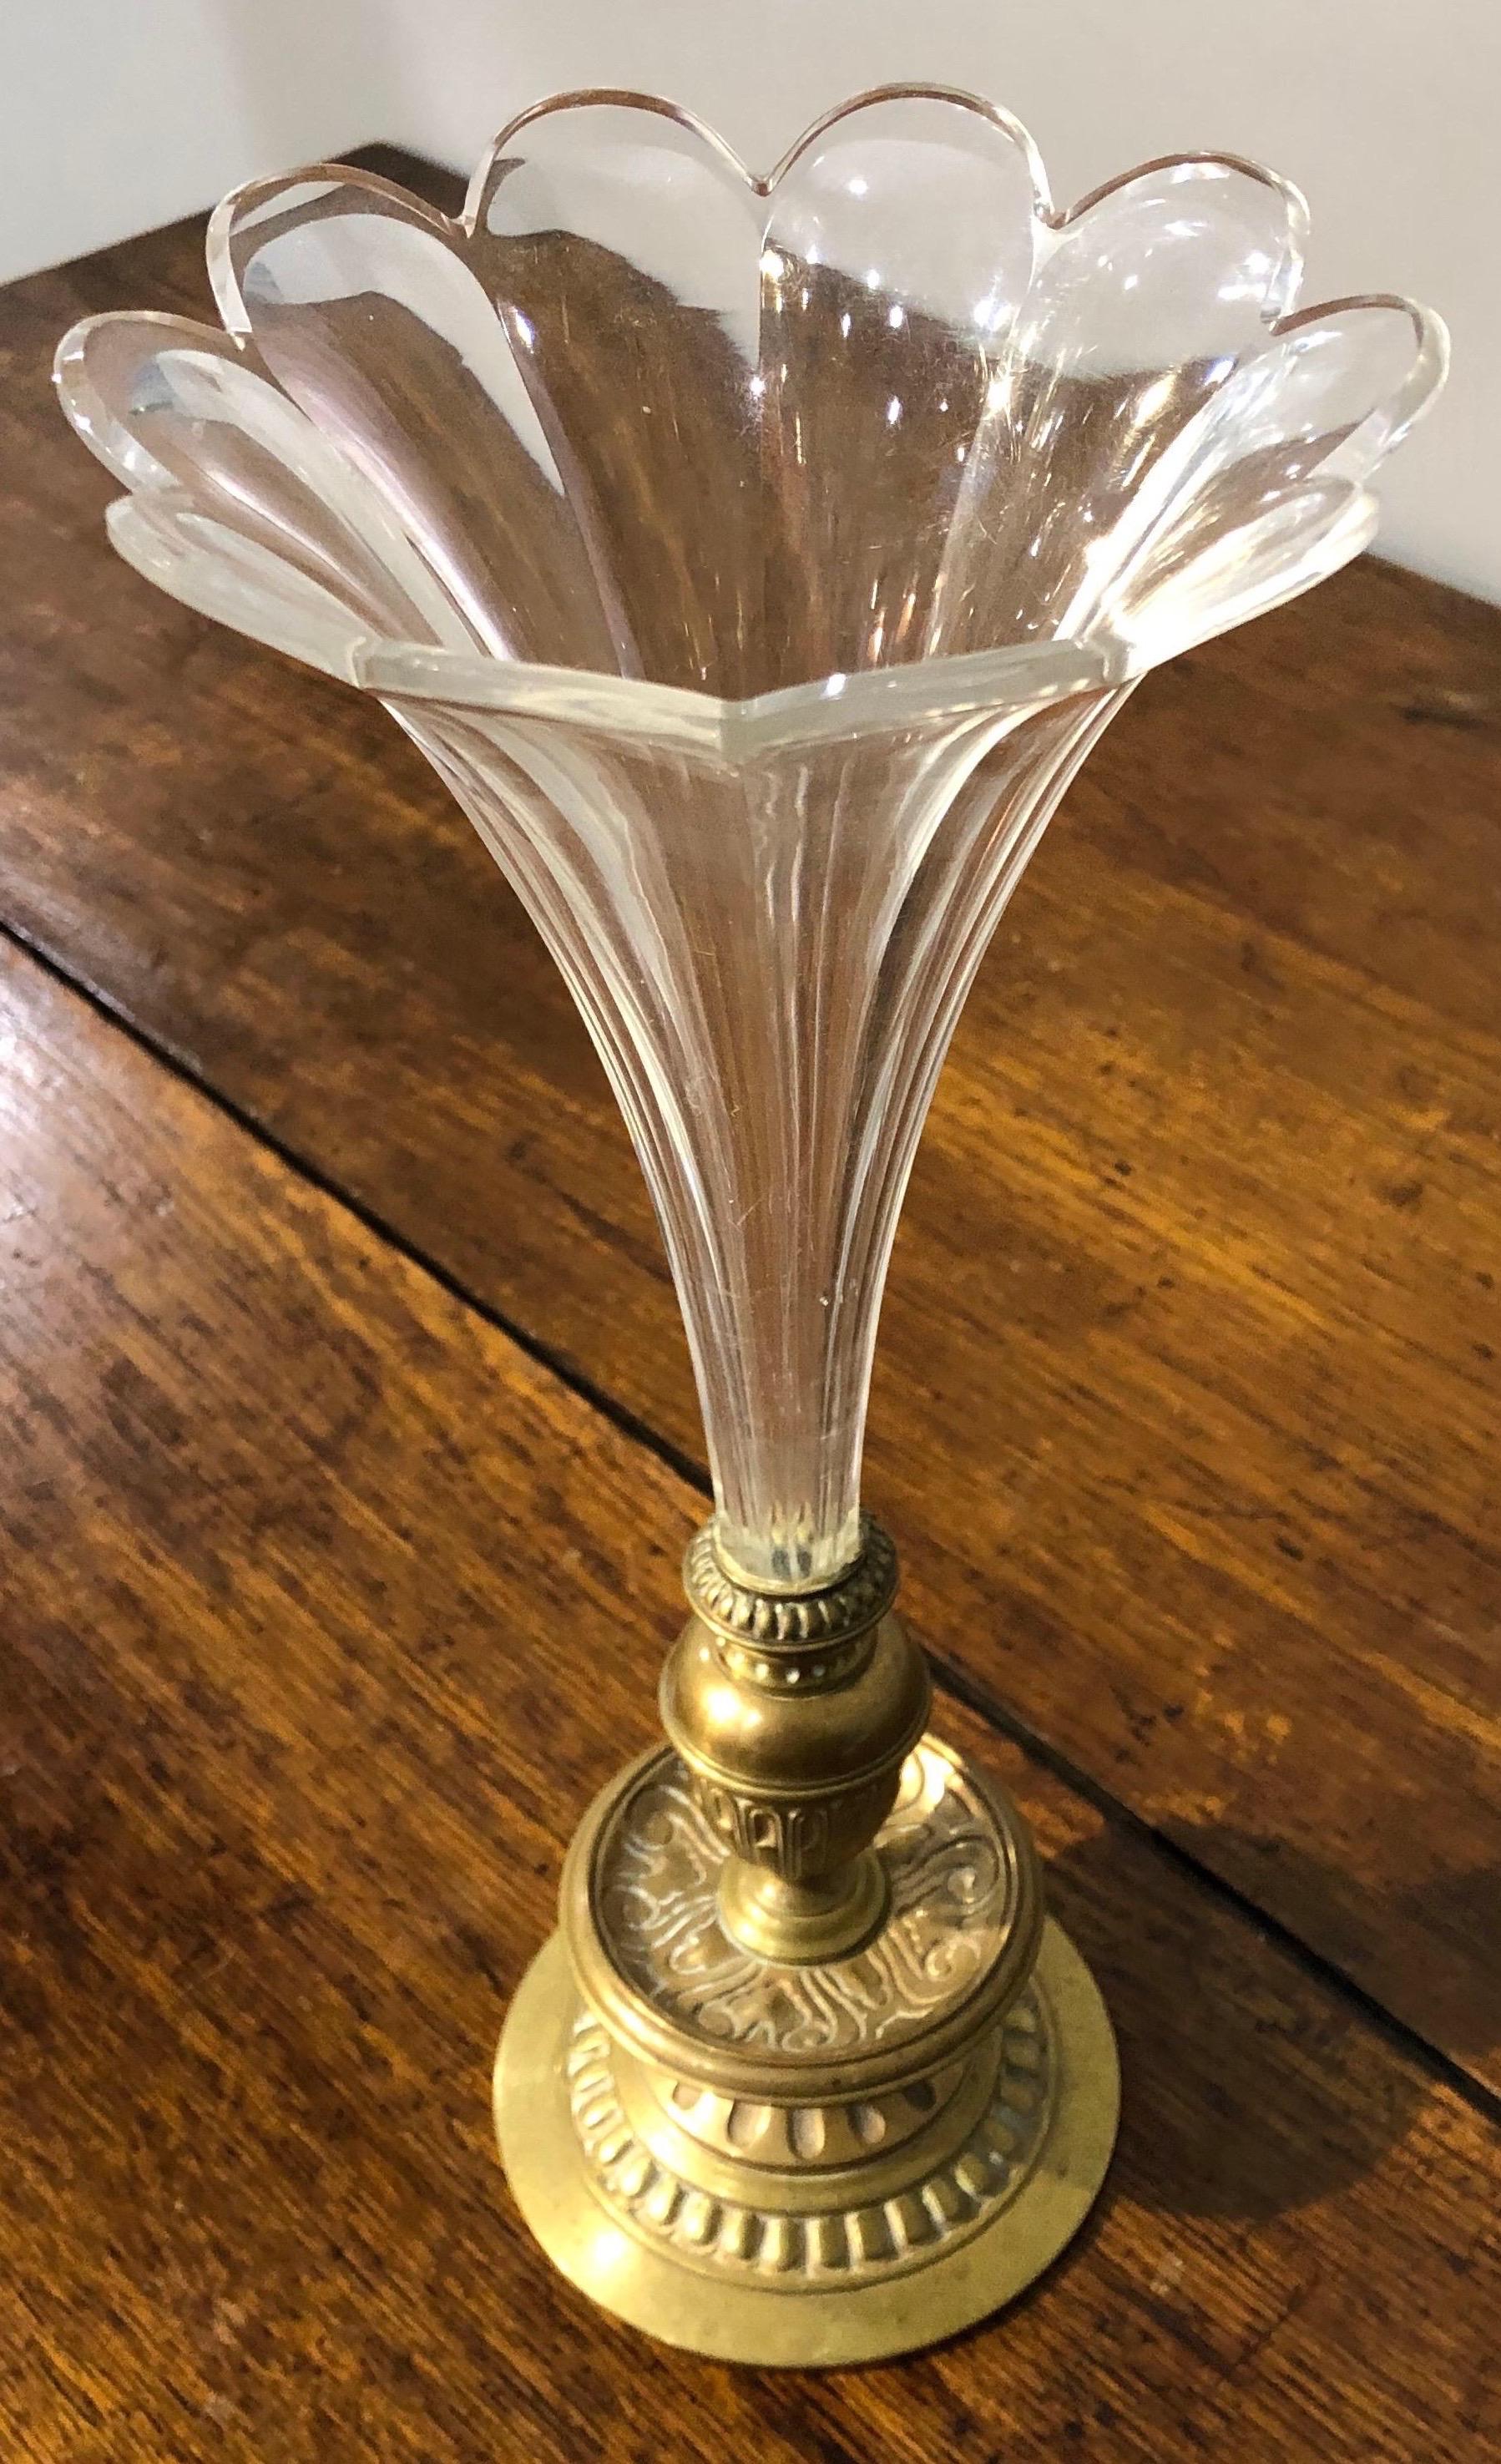 Late 19th-early 20th vase stamped Baccarat.